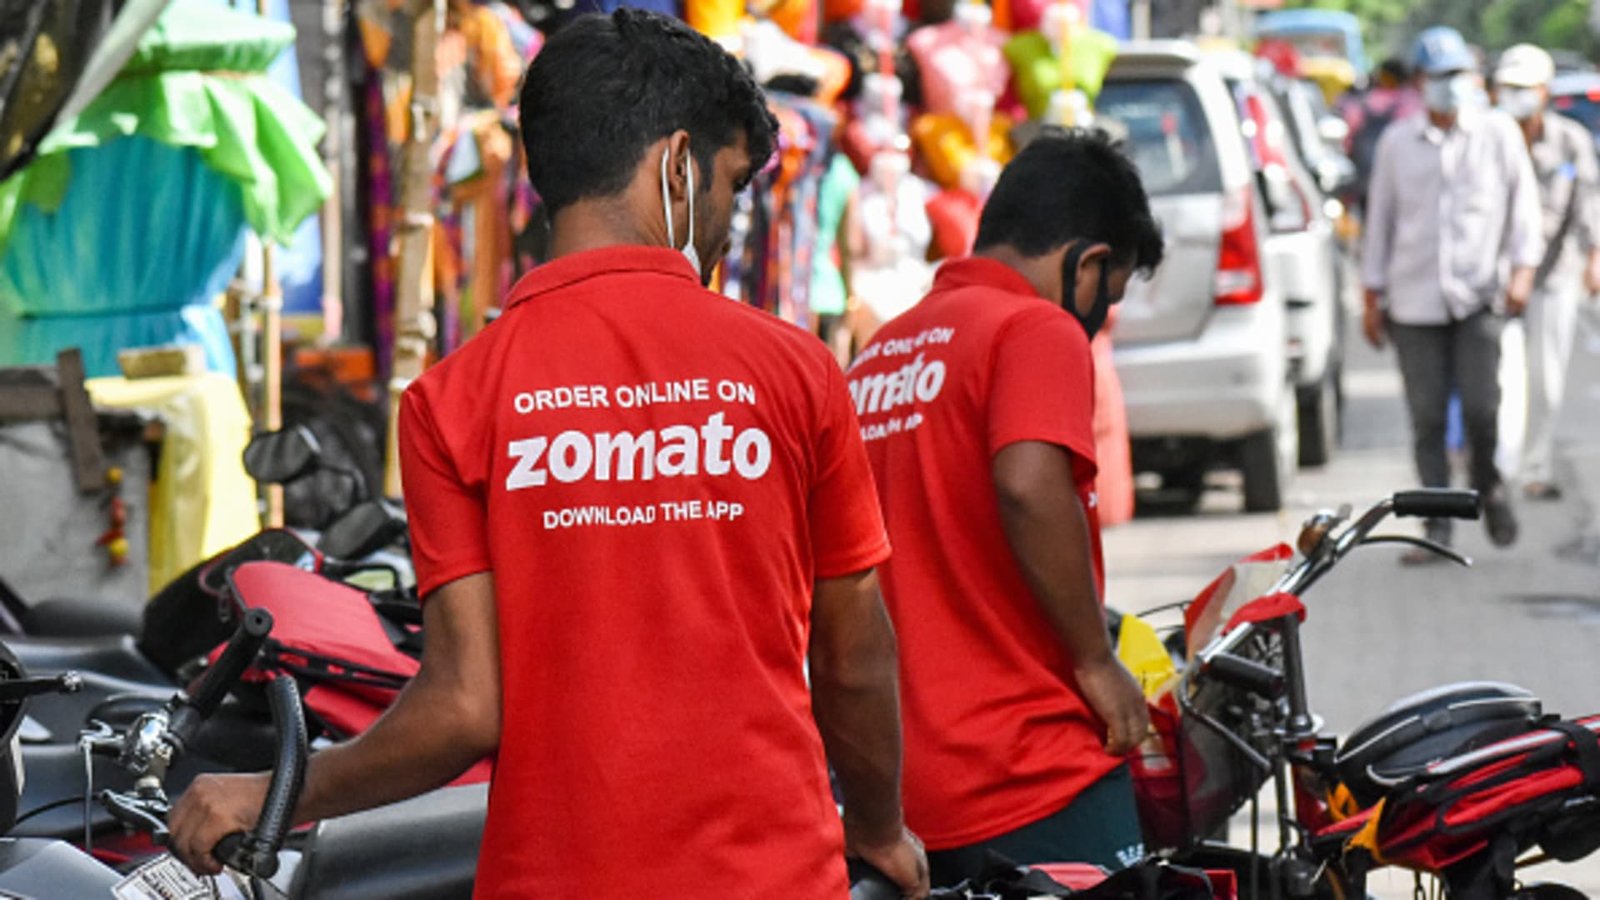 Zomato's Technological Triumph: From Menu Scans to IT Pionee